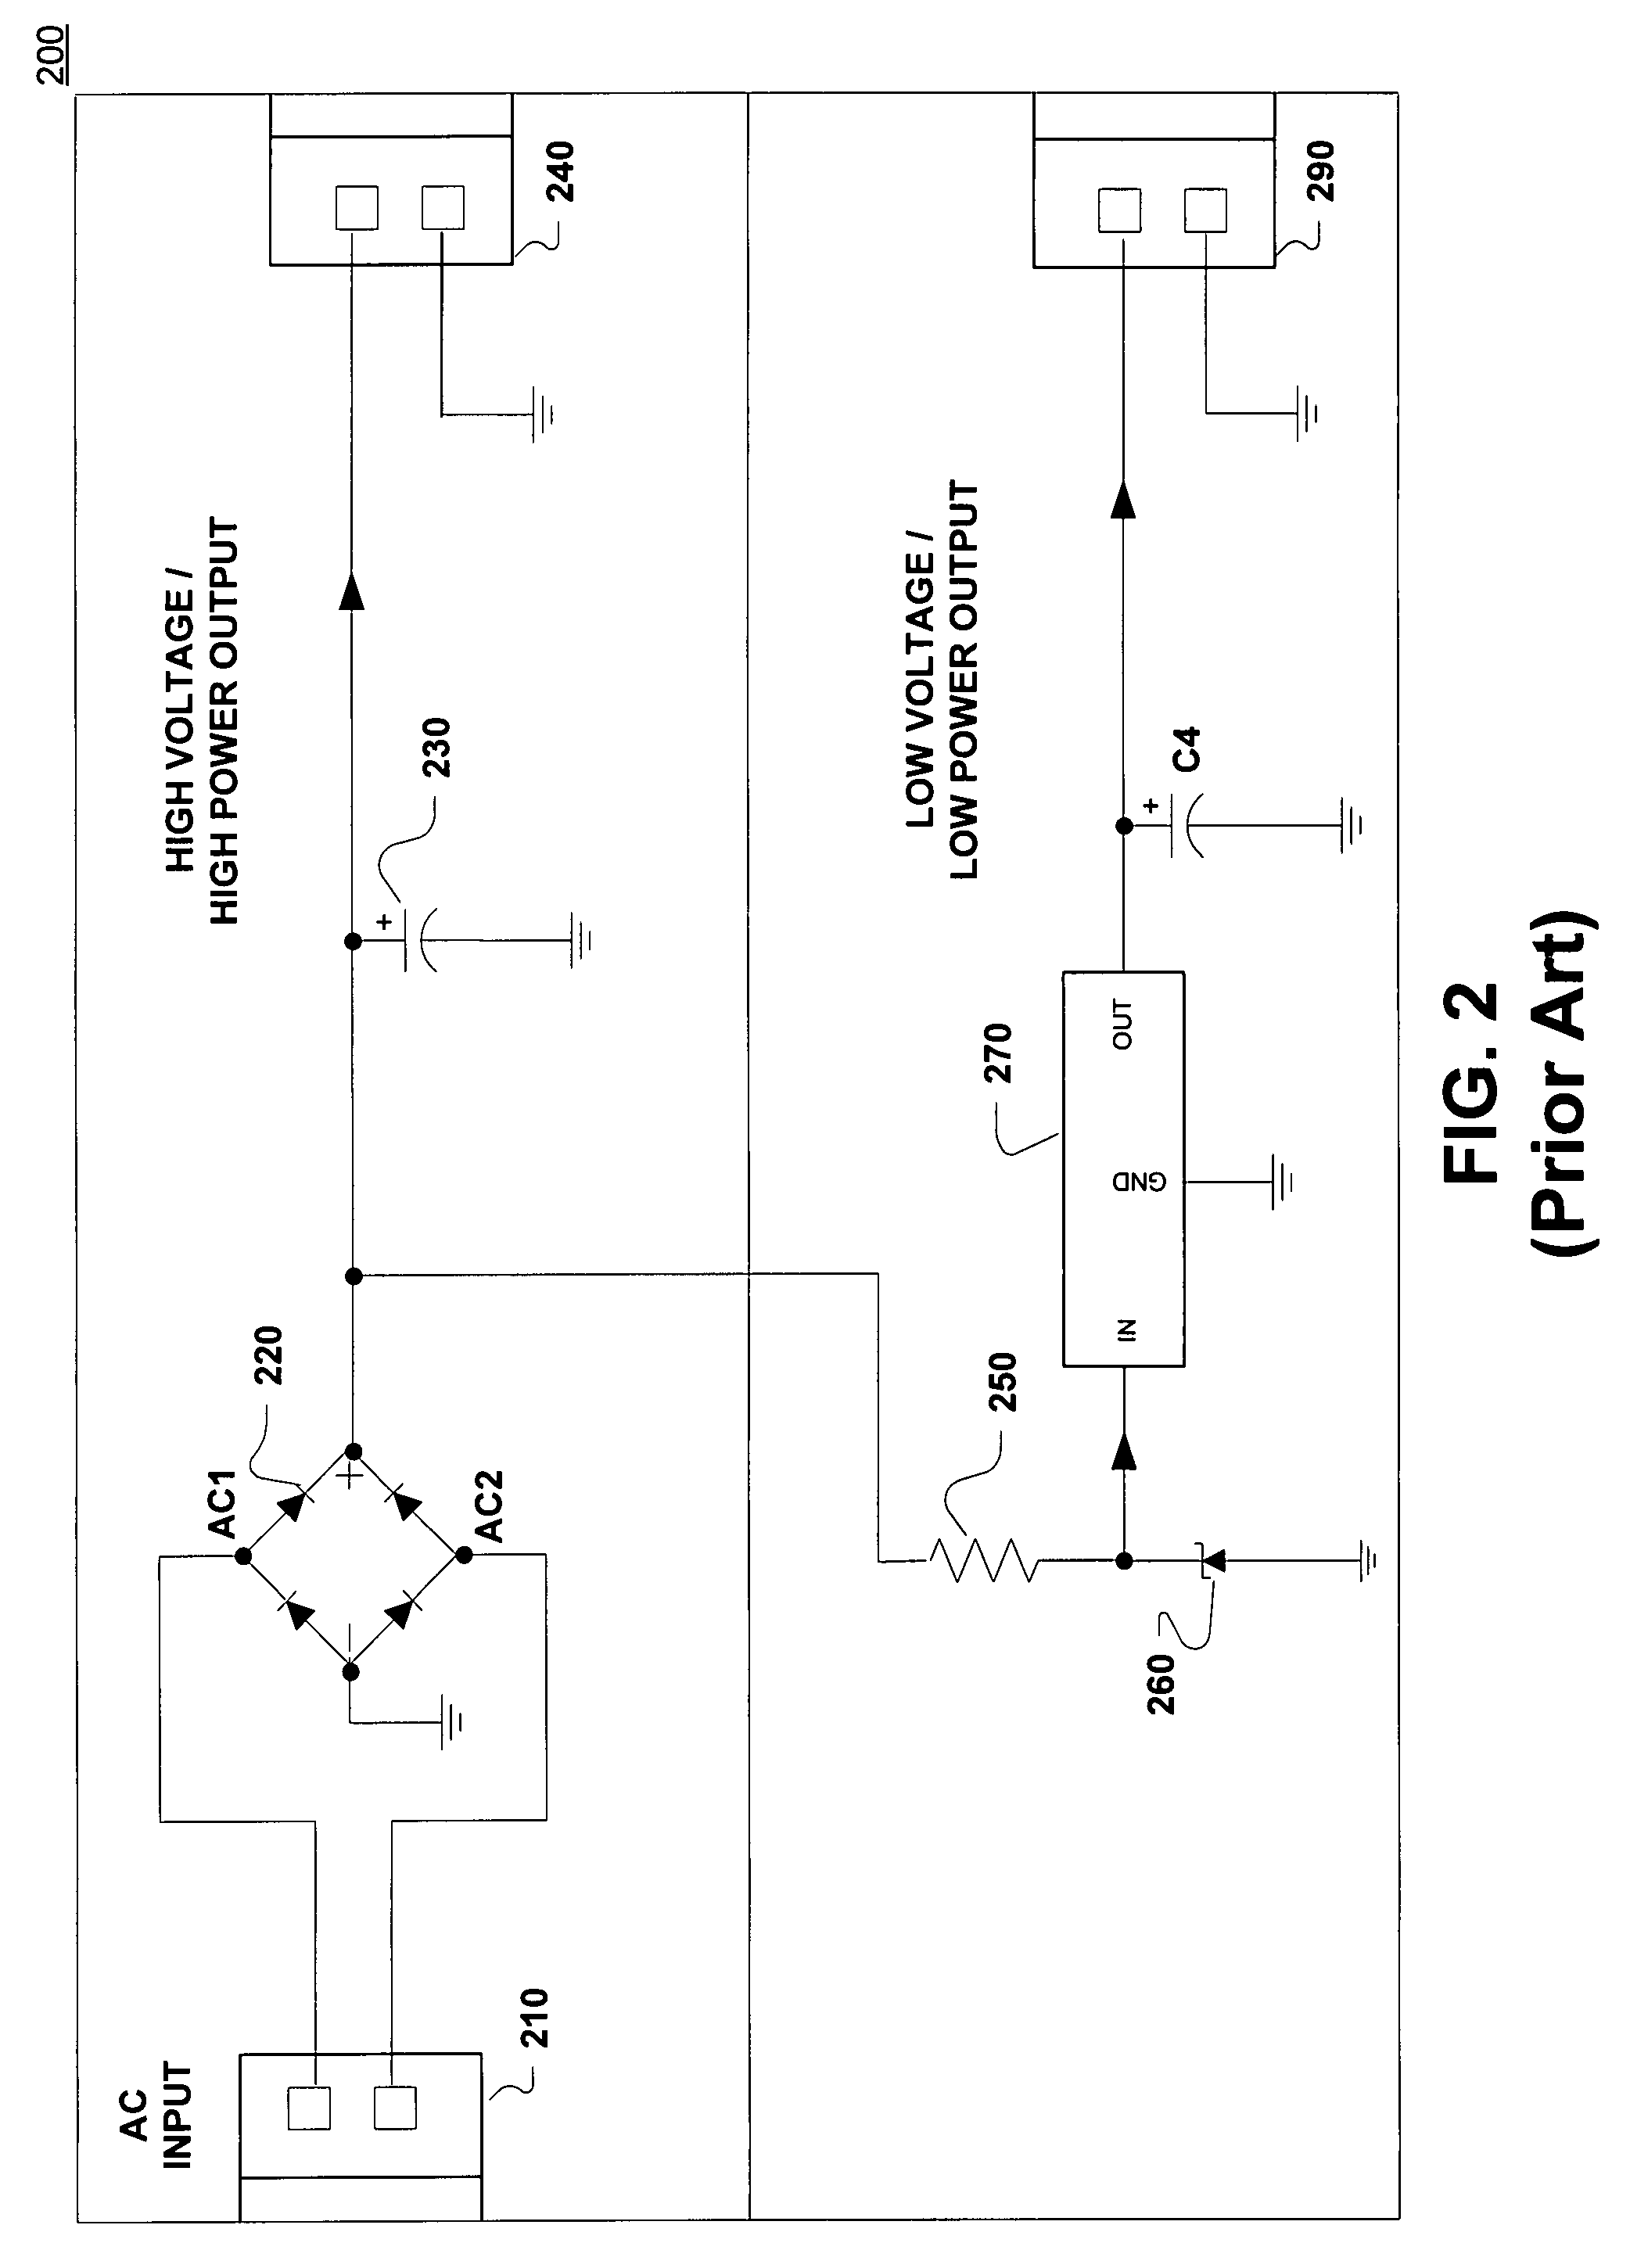 Power circuit for generating non-isolated low voltage power in a standby condition